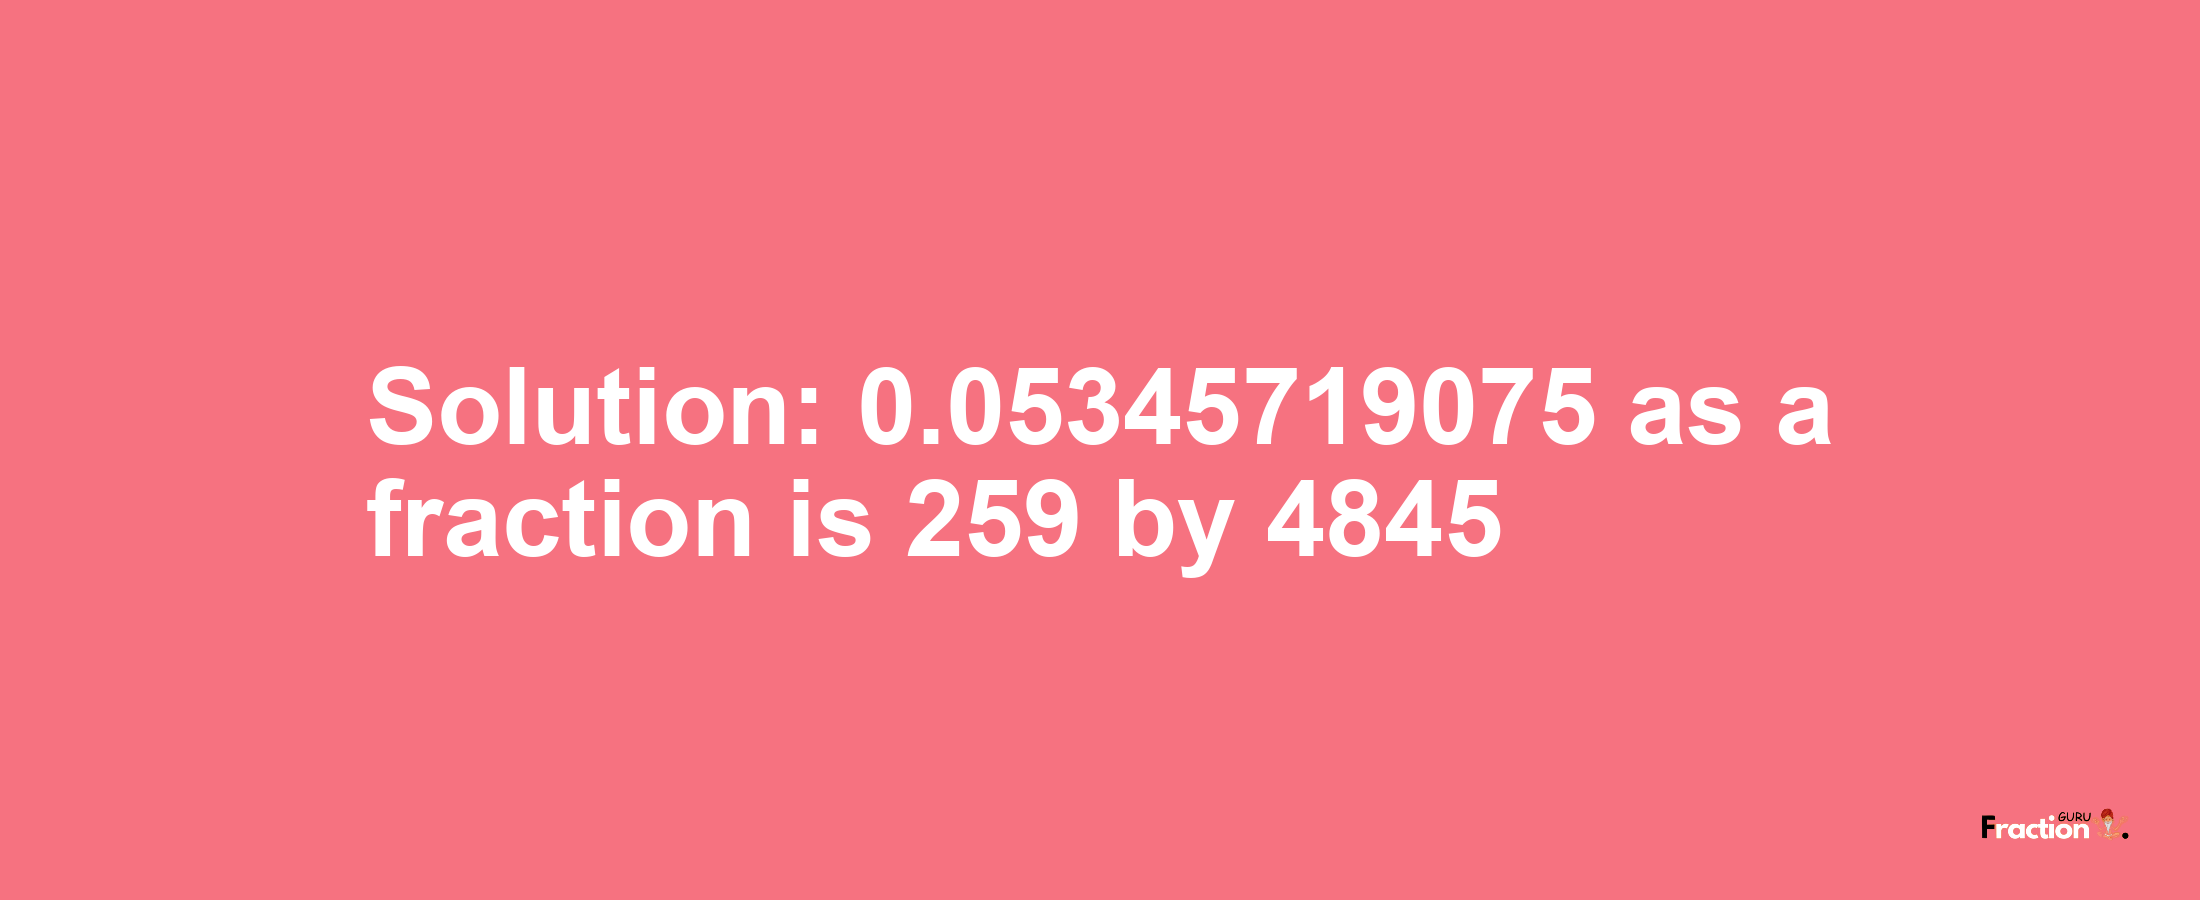 Solution:0.05345719075 as a fraction is 259/4845